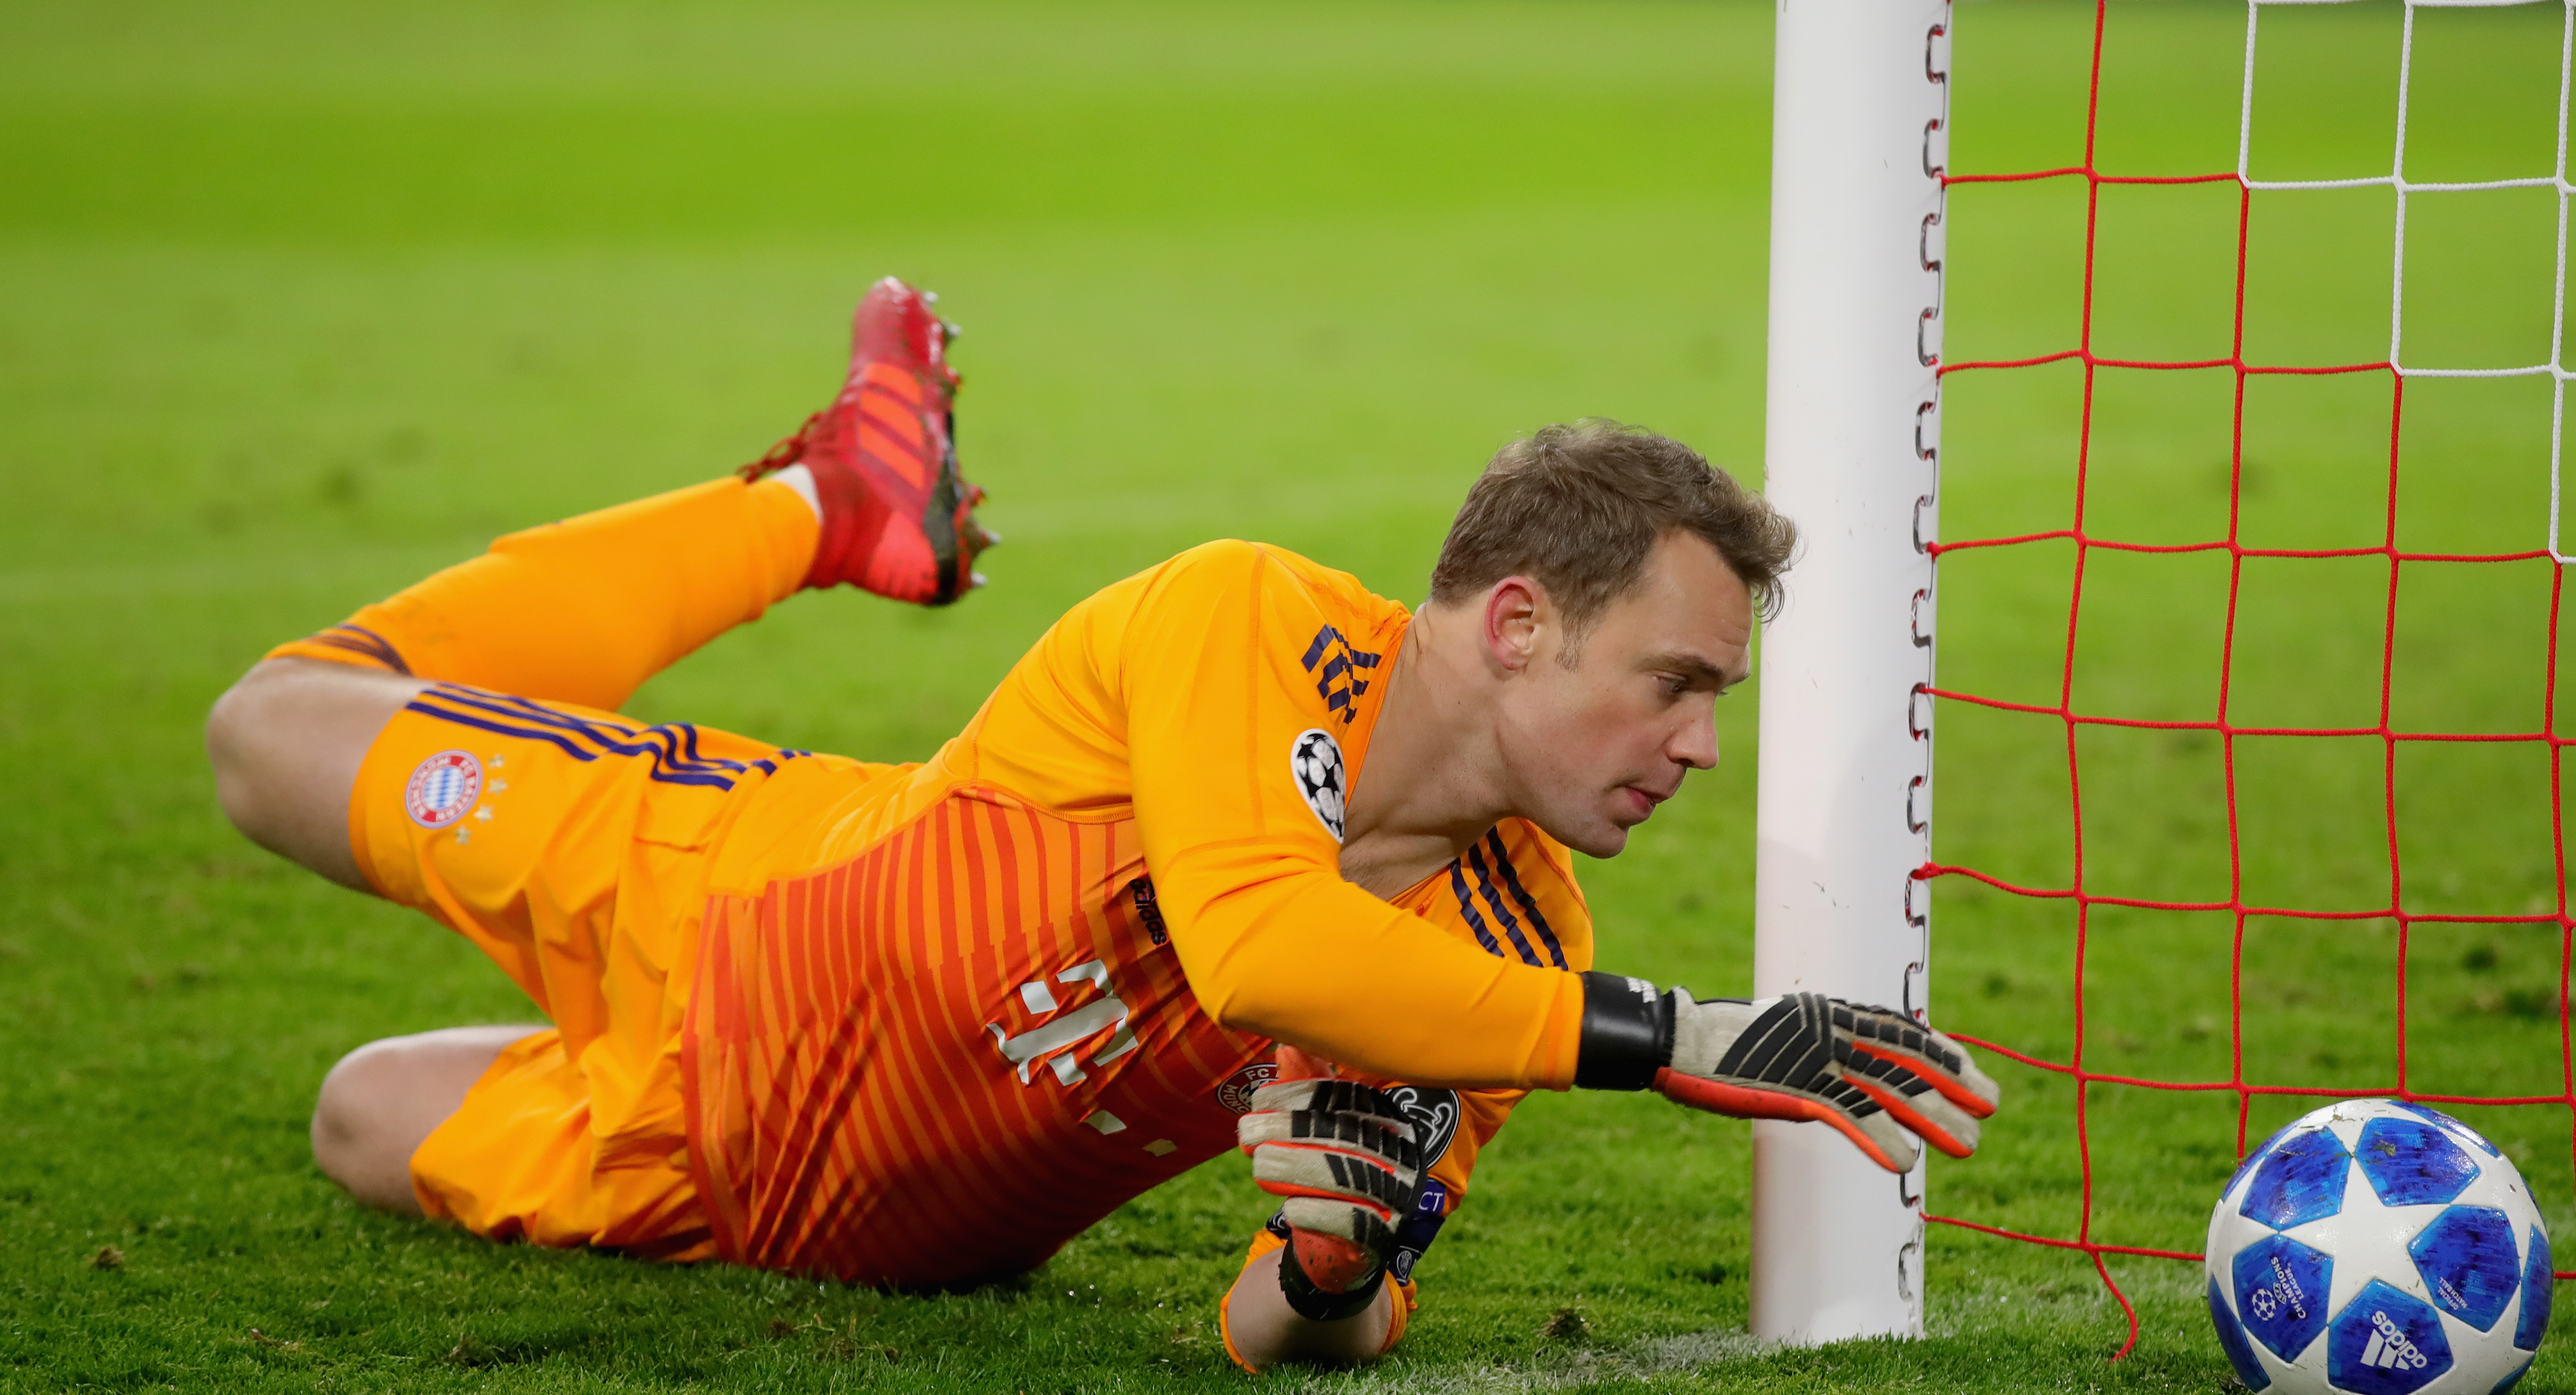 MUNICH, GERMANY - NOVEMBER 27:  Manuel Neuer, keeper of FC Bayern Muenchen safes the ball during the Group E match of the UEFA Champions League between FC Bayern Muenchen and SL Benfica at Allianz Arena on November 27, 2018 in Munich, Germany.  (Photo by Alexander Hassenstein/Bongarts/Getty Images)